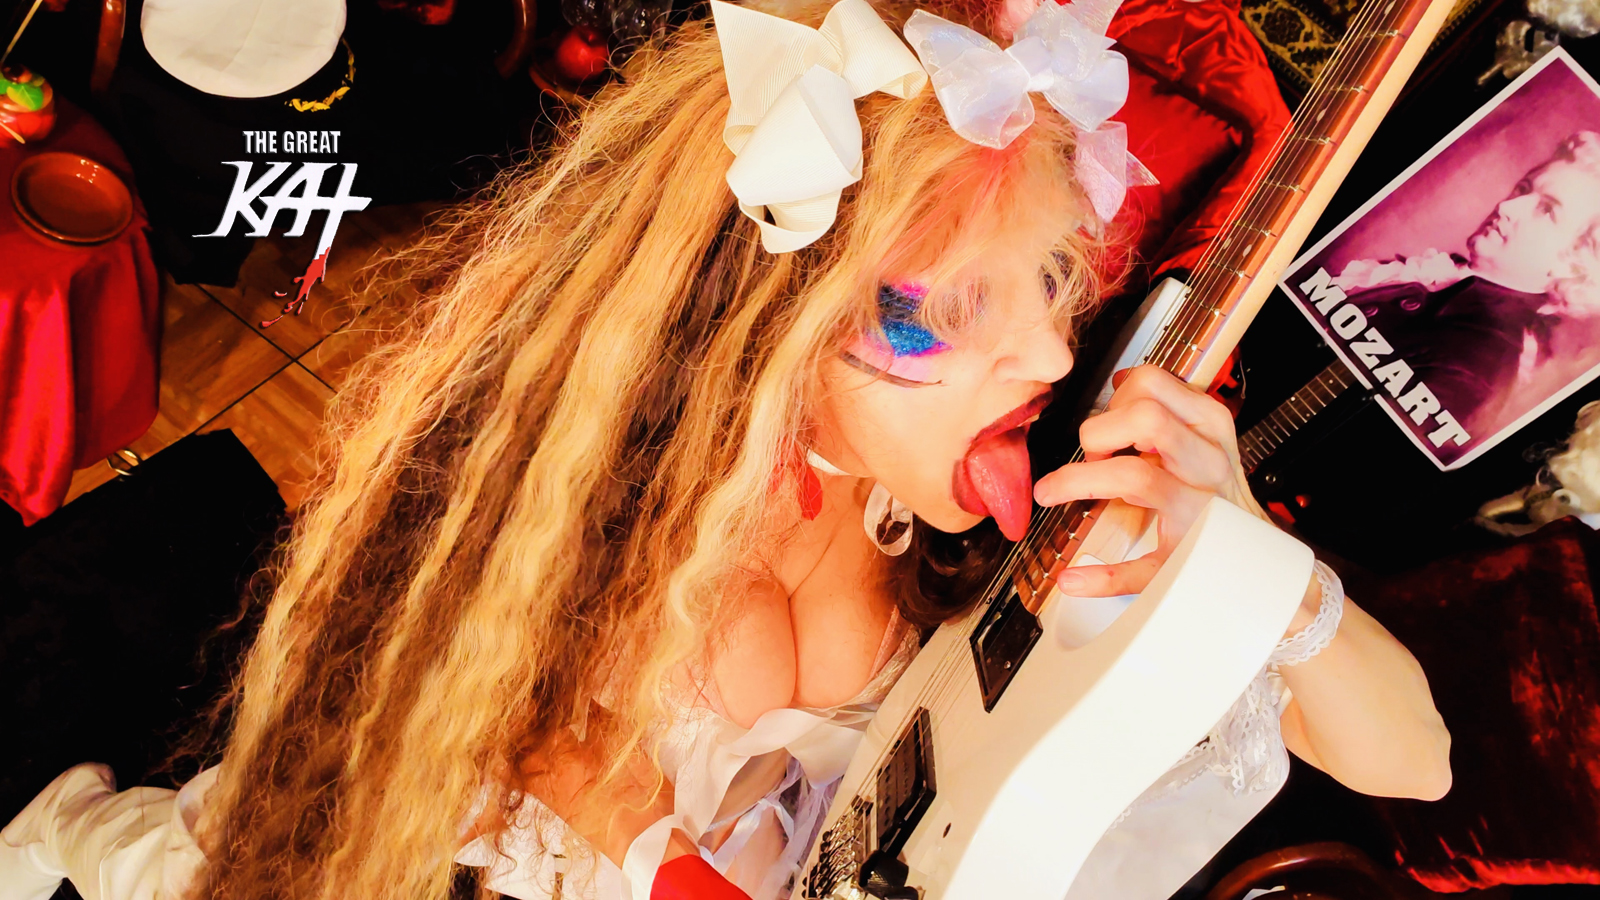 MOZART'S SHRED LICKS! From CHEF GREAT KAT BAKES GERMAN APPLE STRUDEL WITH MOZART!!